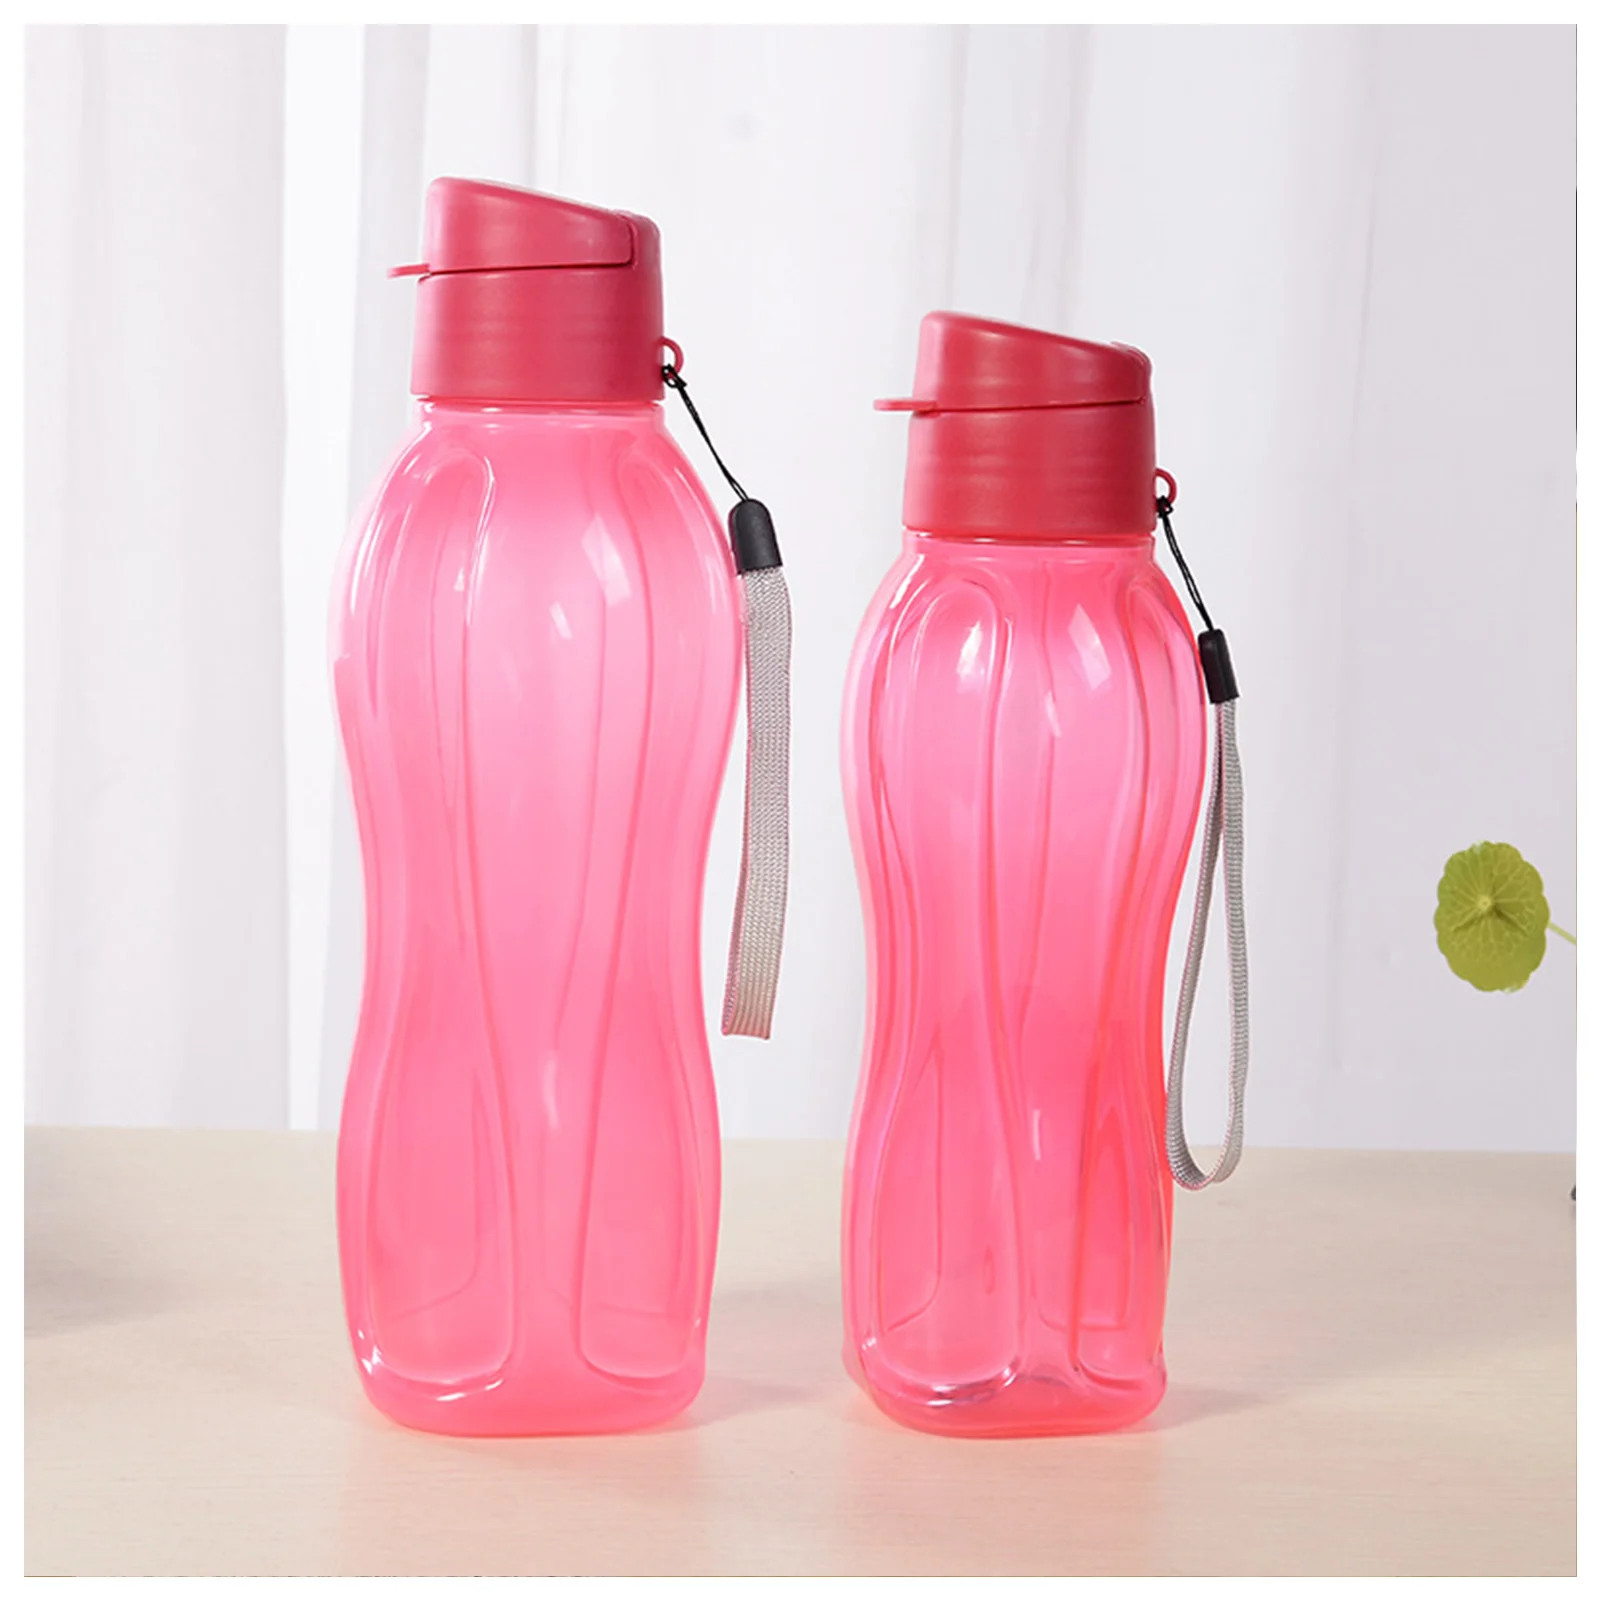 https://ae01.alicdn.com/kf/S4f9ec14e76274735b93a1f9218a7b514i/Large-Capacity-Water-Bottle-with-Handle-800-1100ml-Drinking-Bottles-Straw-Cup-Pure-Color-Plastic-Sports.jpg